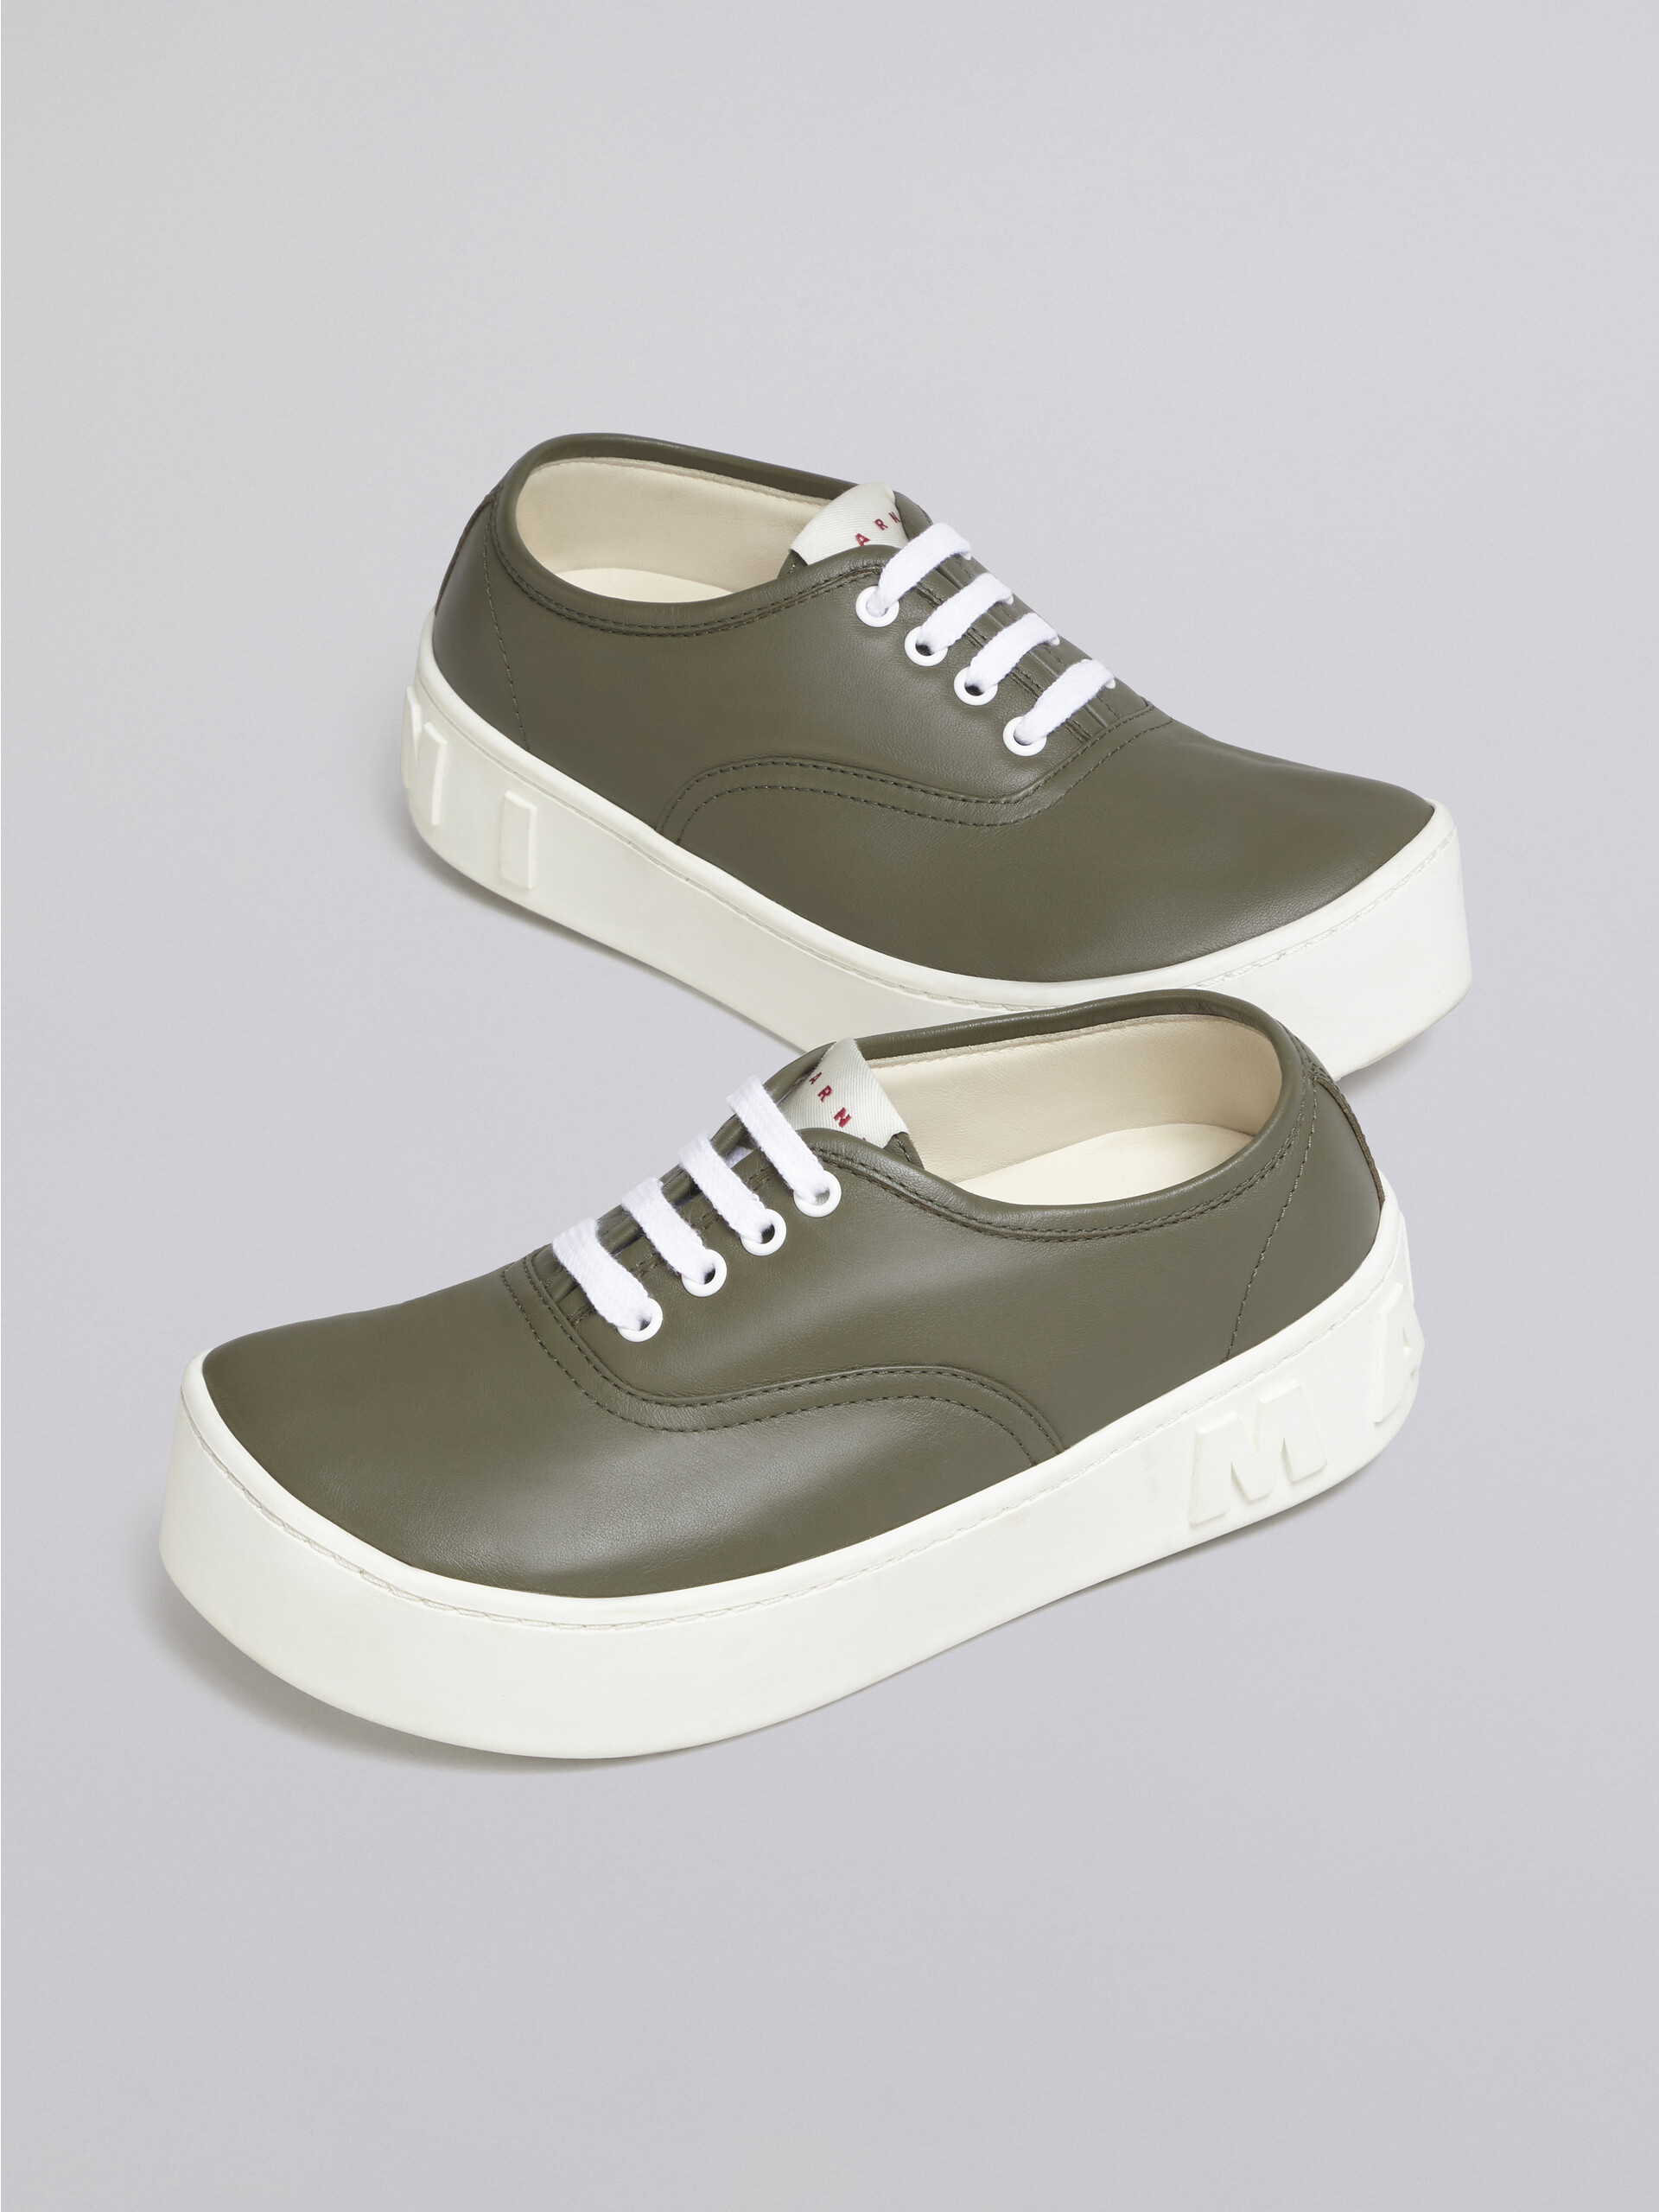 Green smooth calfskin sneaker with raised maxi Marni logo - Sneakers - Image 5